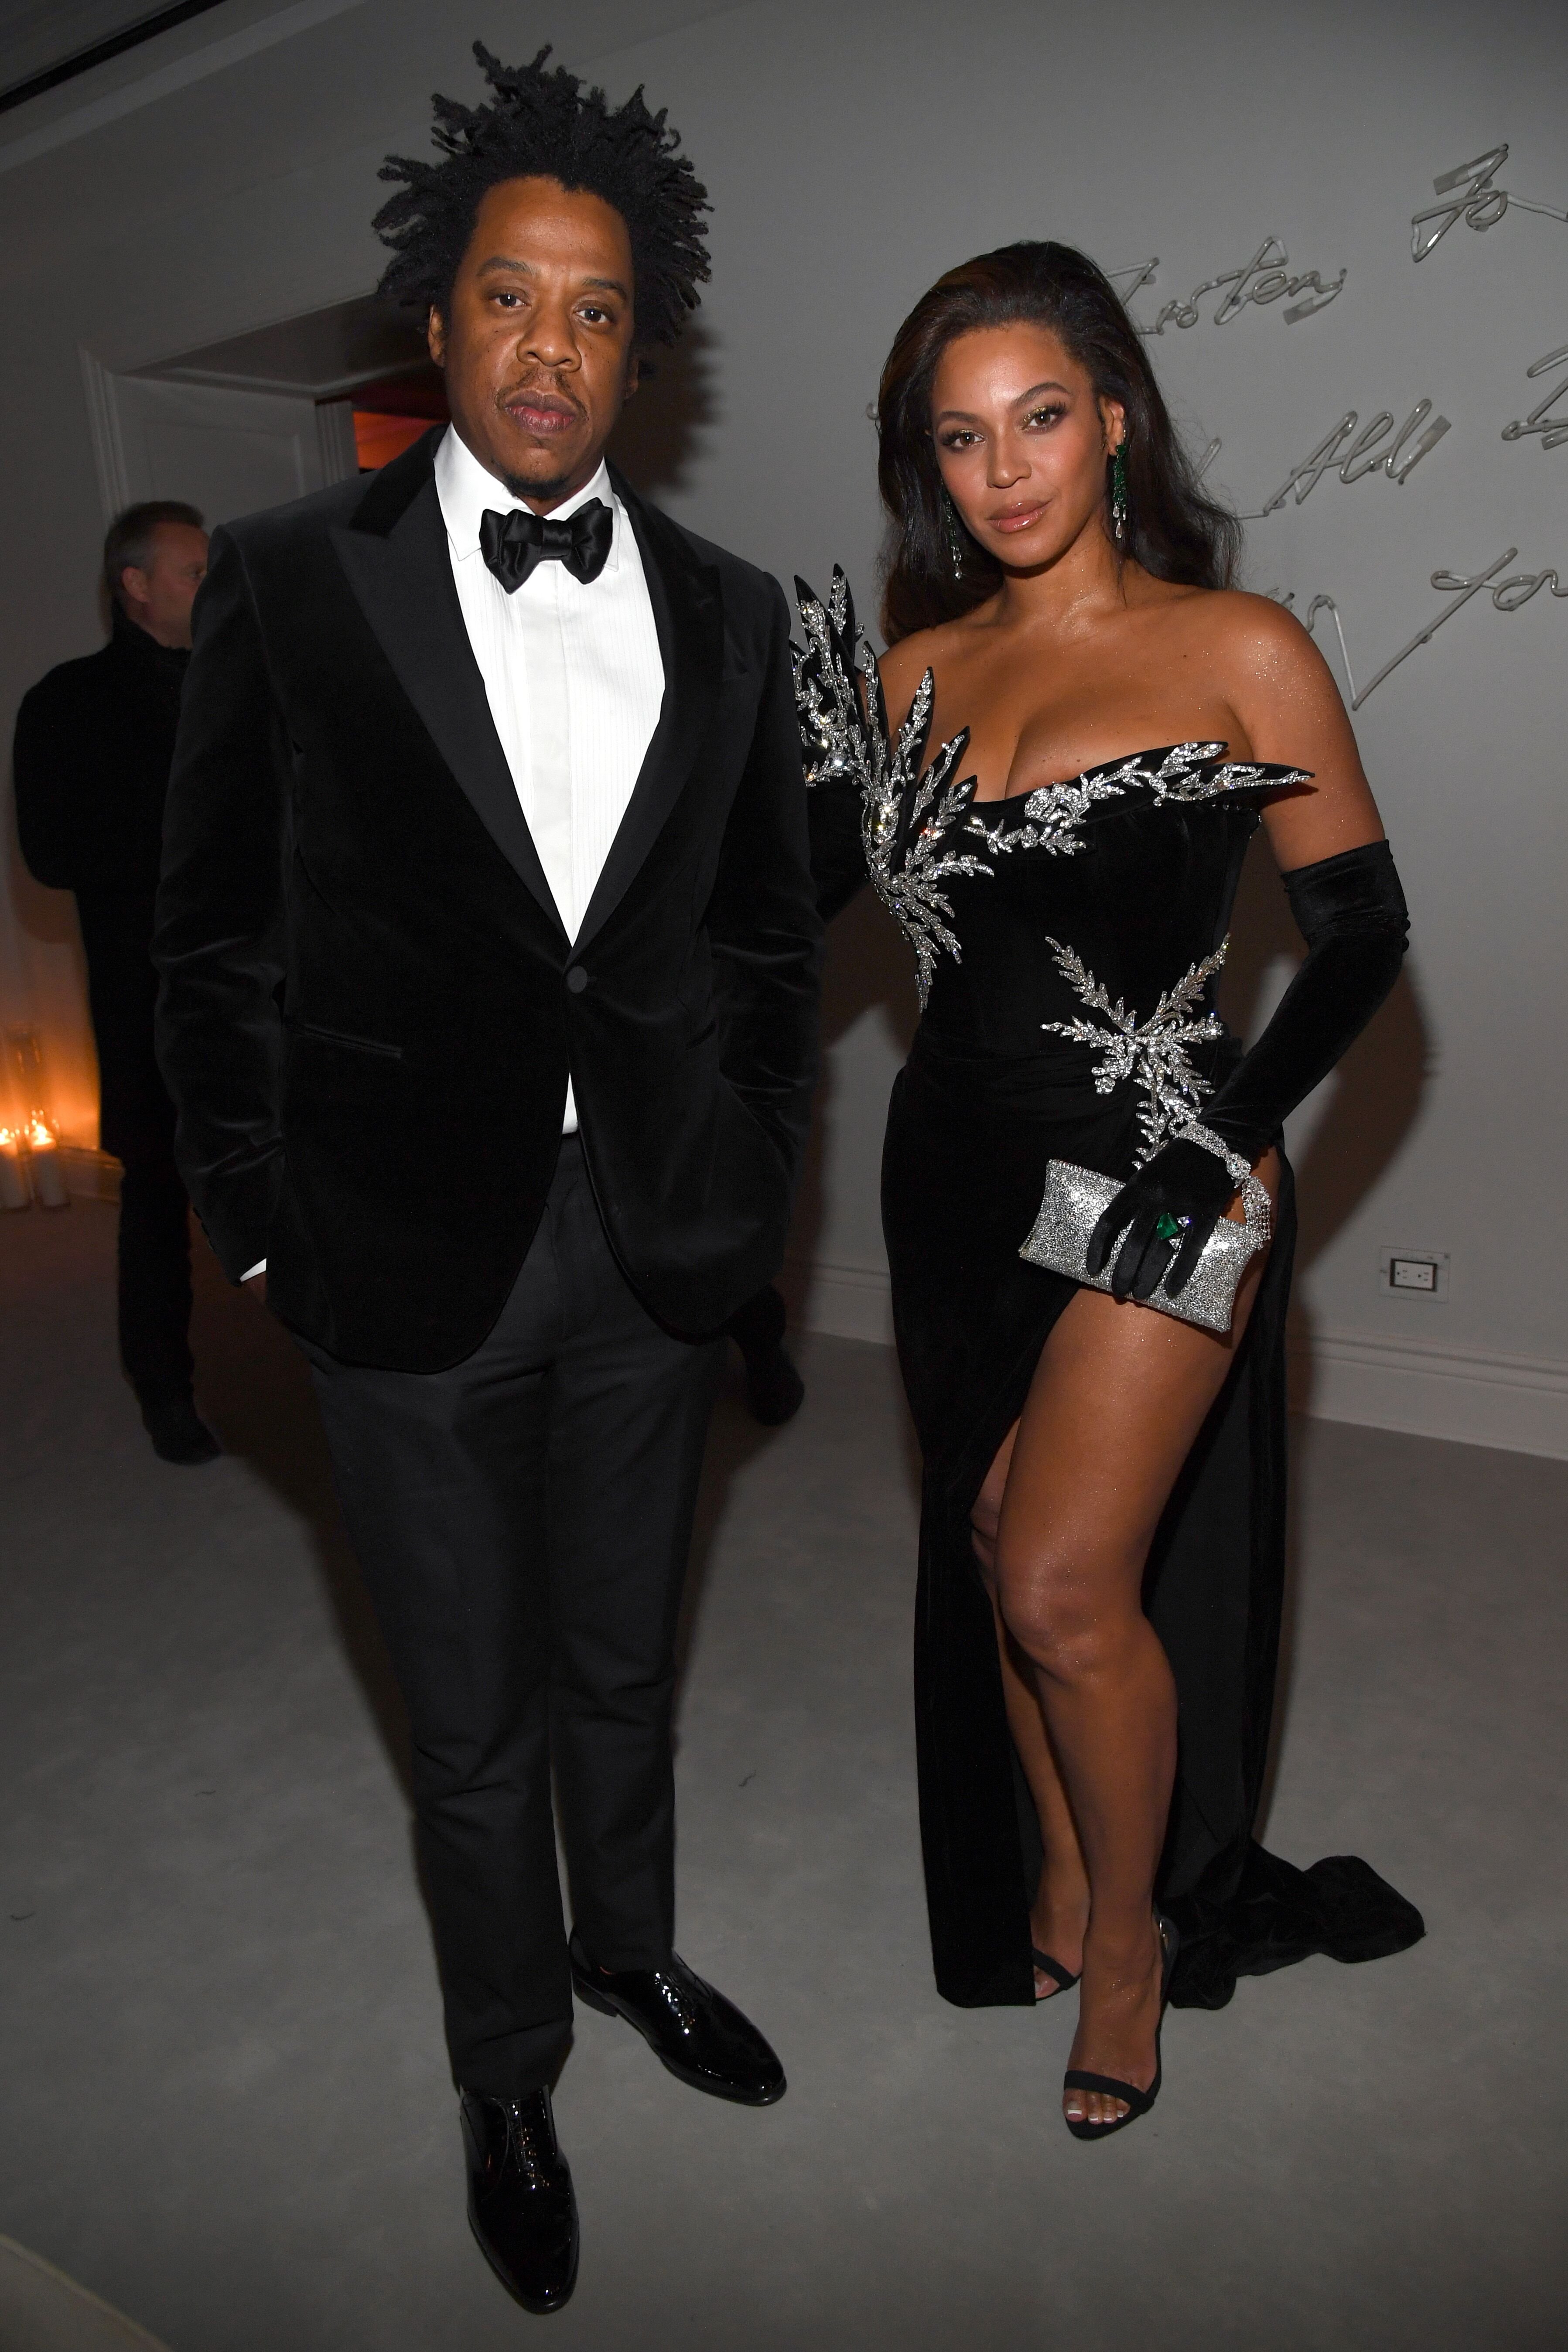 Beyonce and Jay-Z attend Sean "Diddy" Combs' 50th birthday celebration | Source: Getty Images/GlobalImagesUkraine